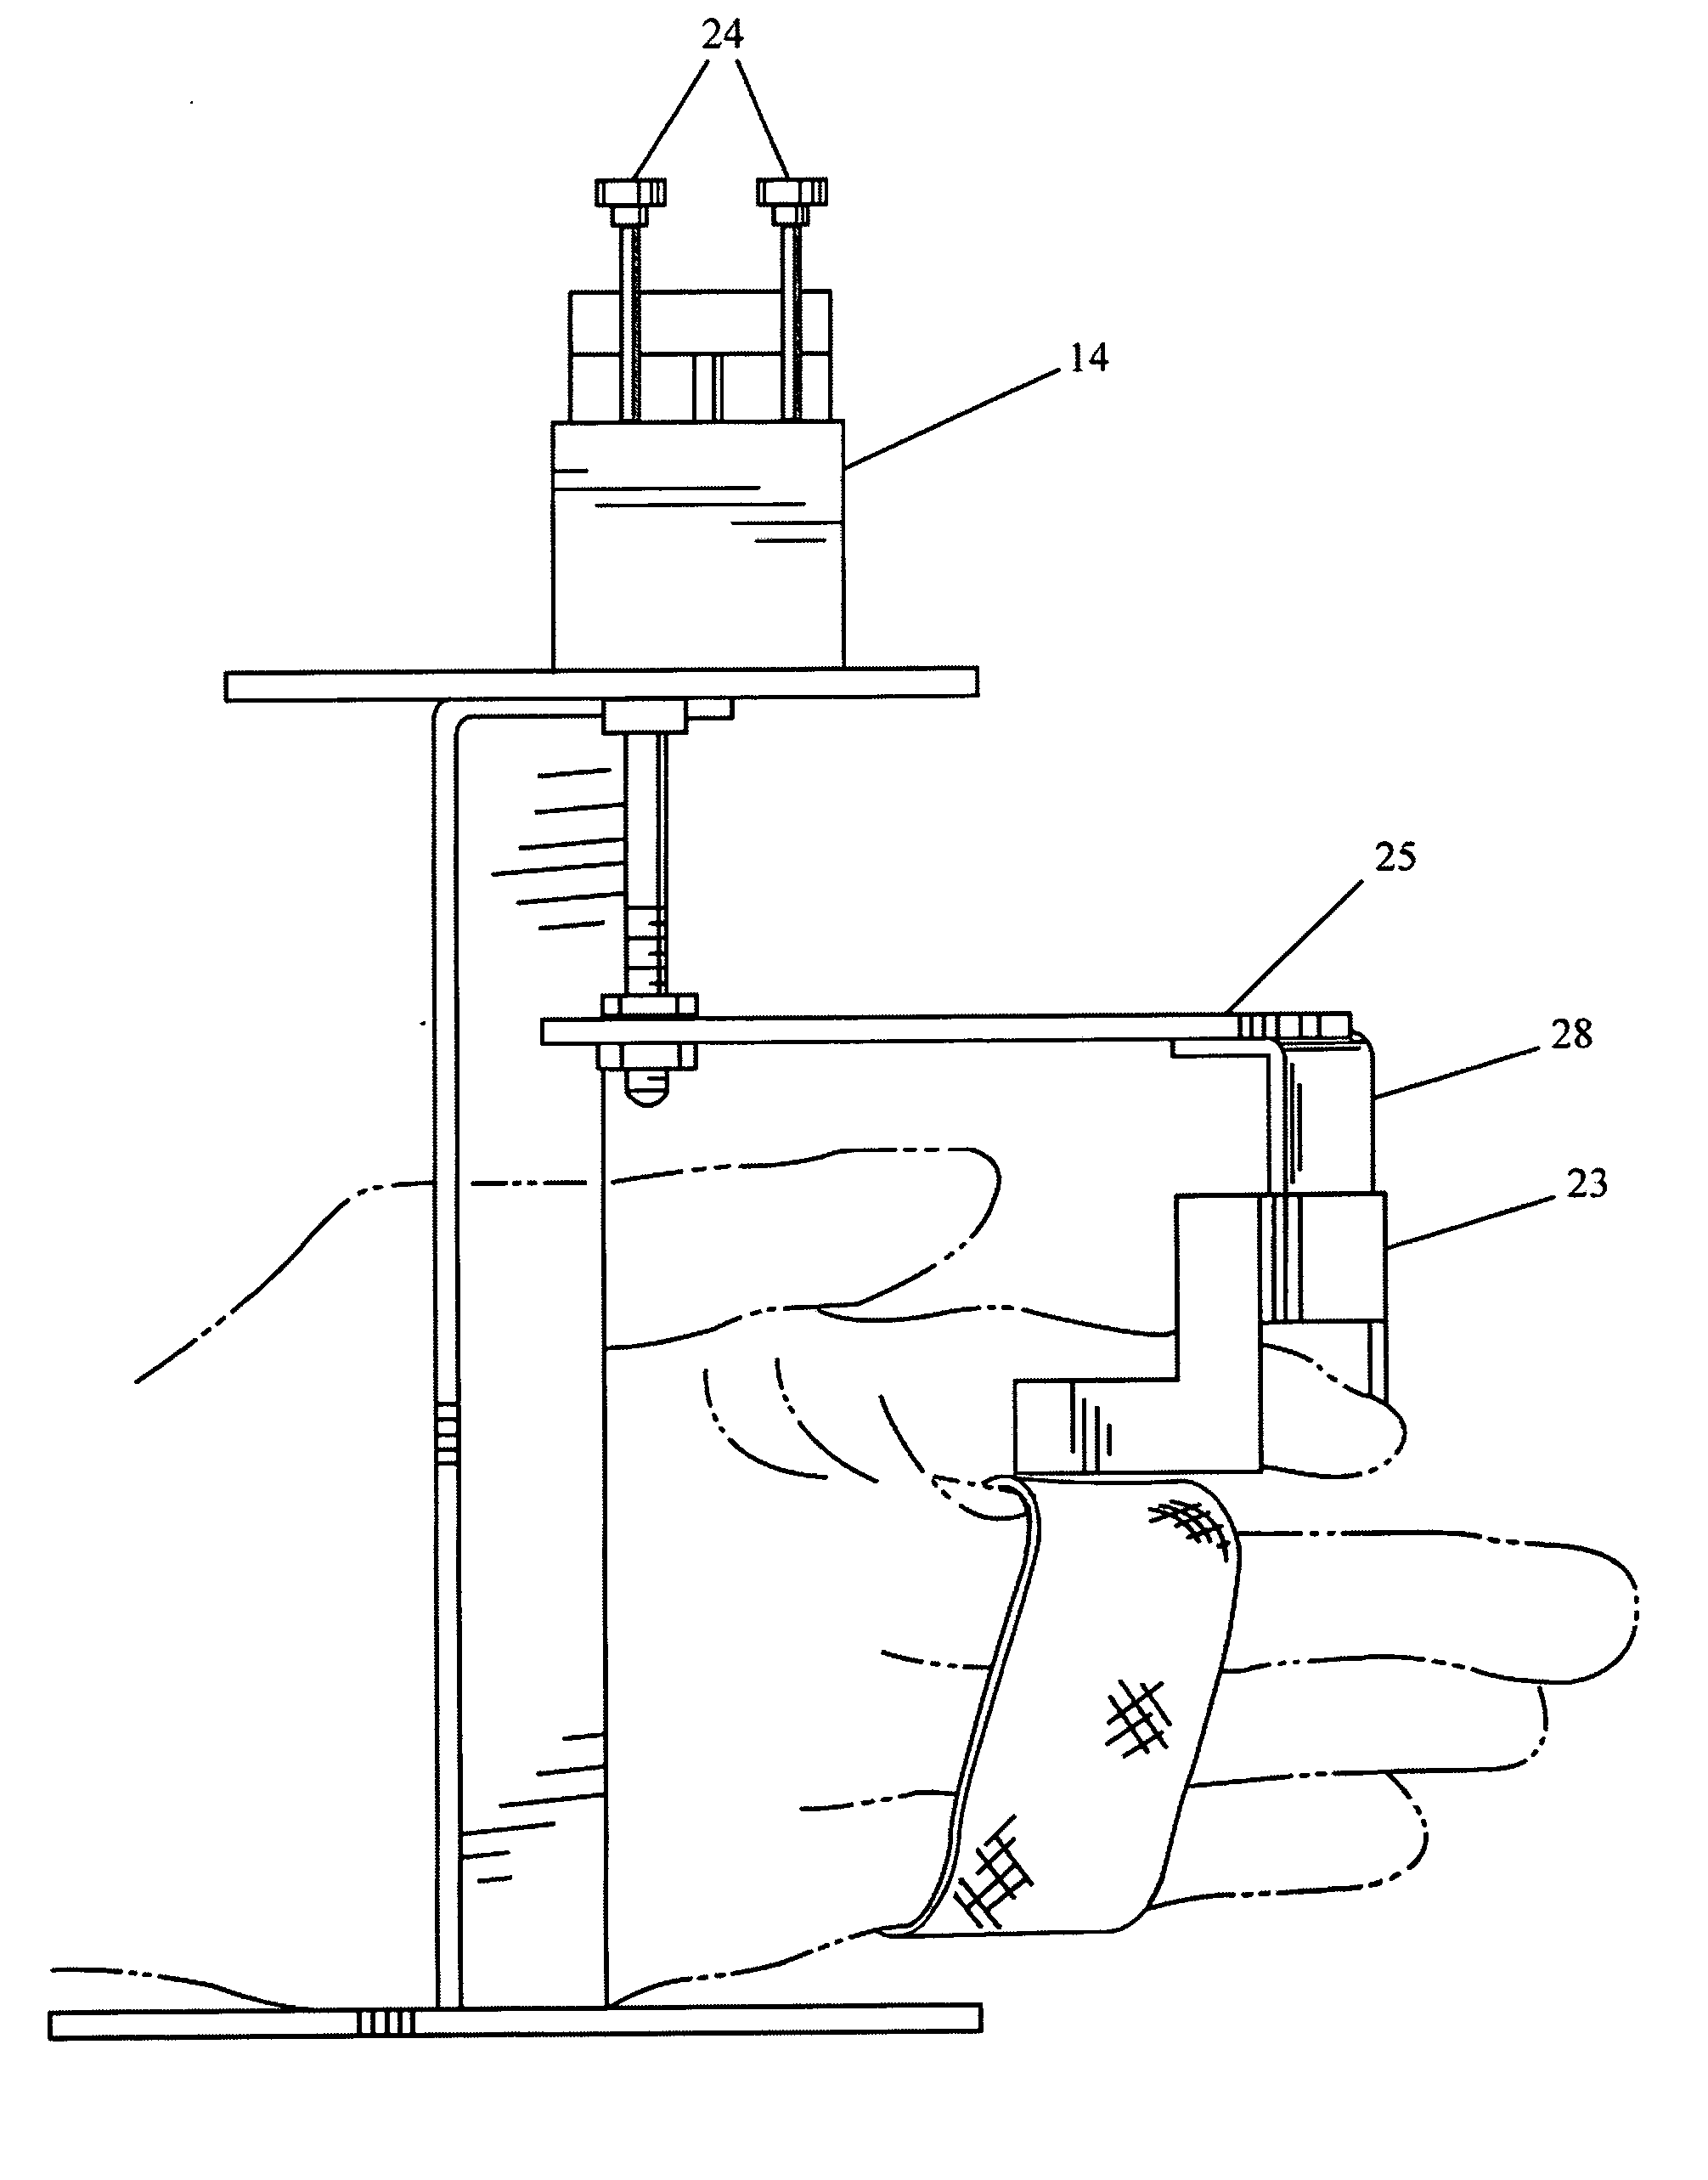 Key device to measure pronation and supination of the forearm